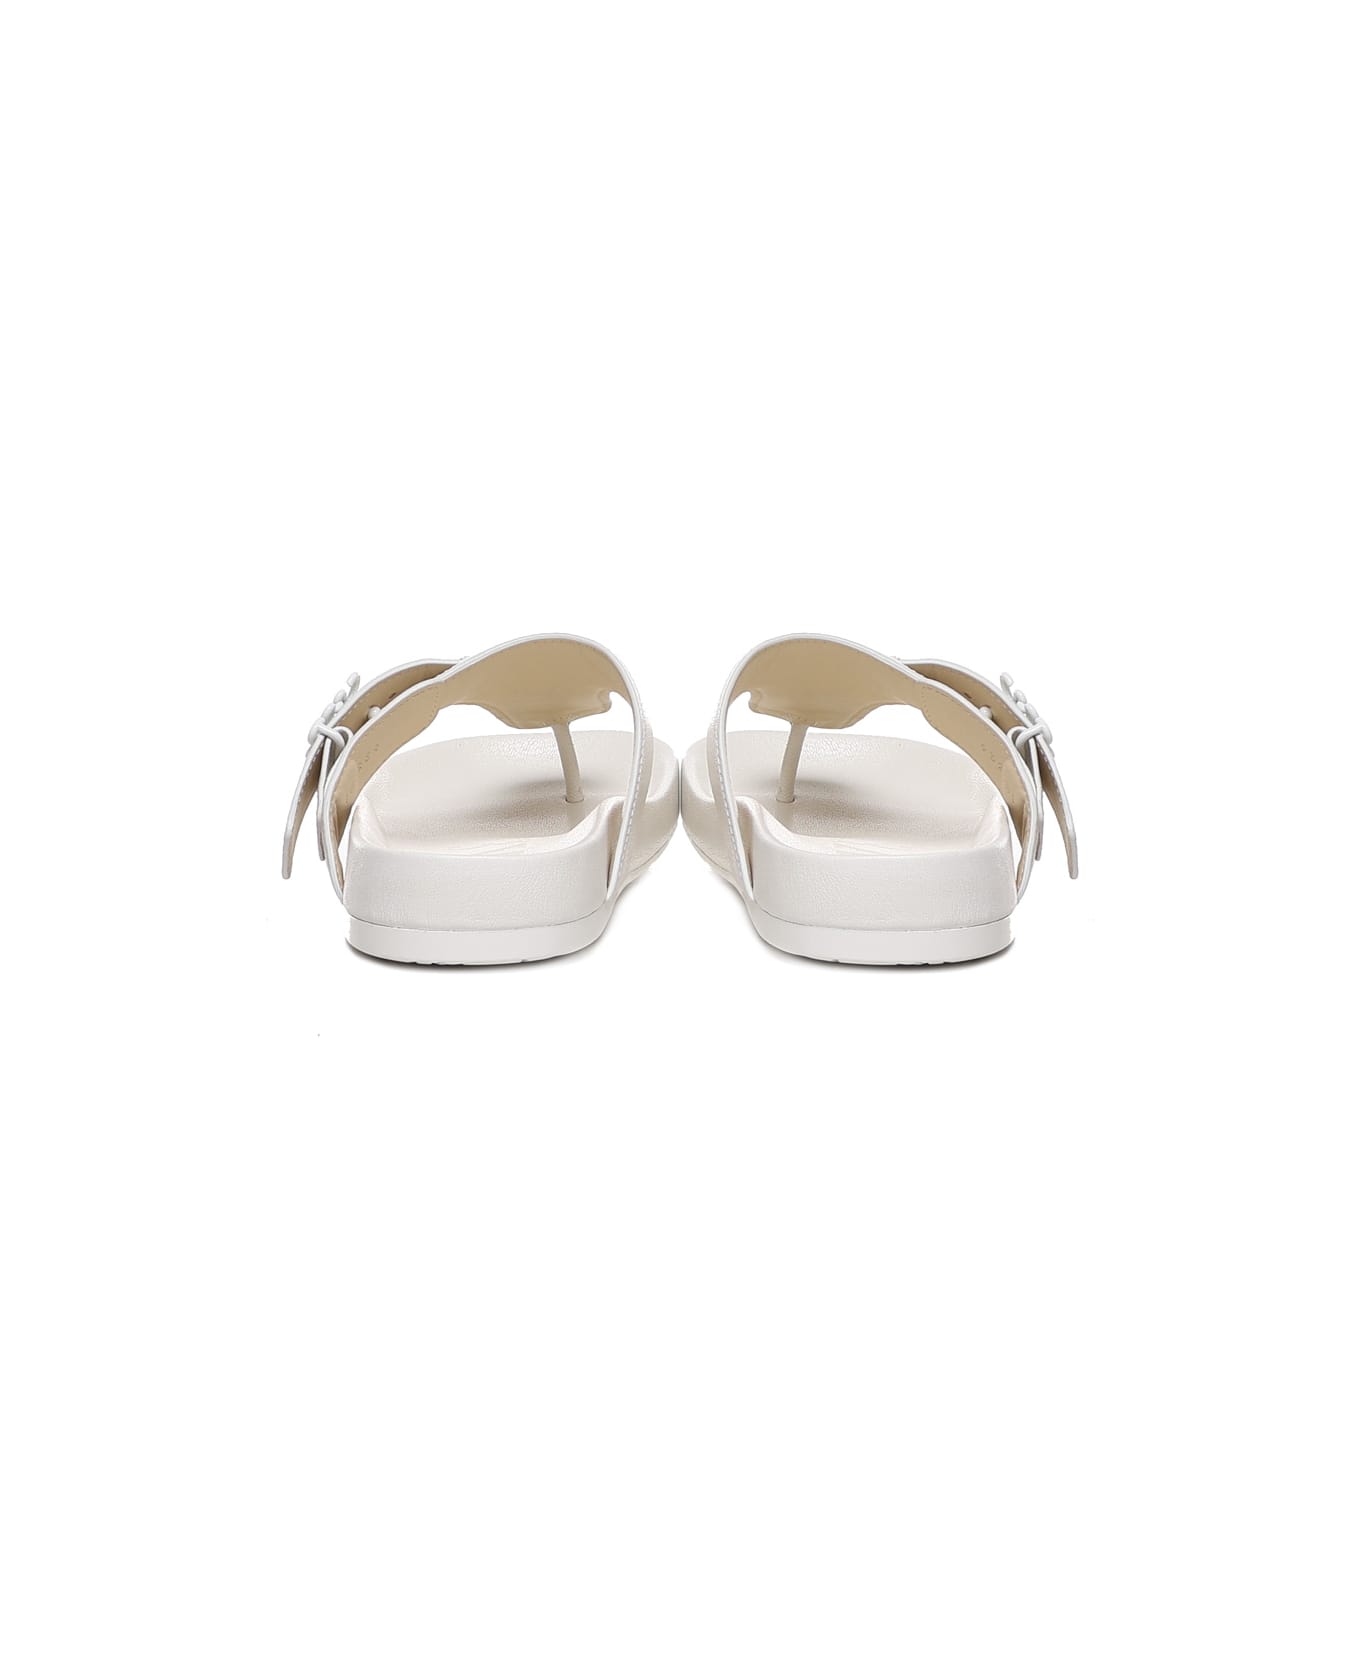 Loewe Ease Sandals In Rubber - White サンダル